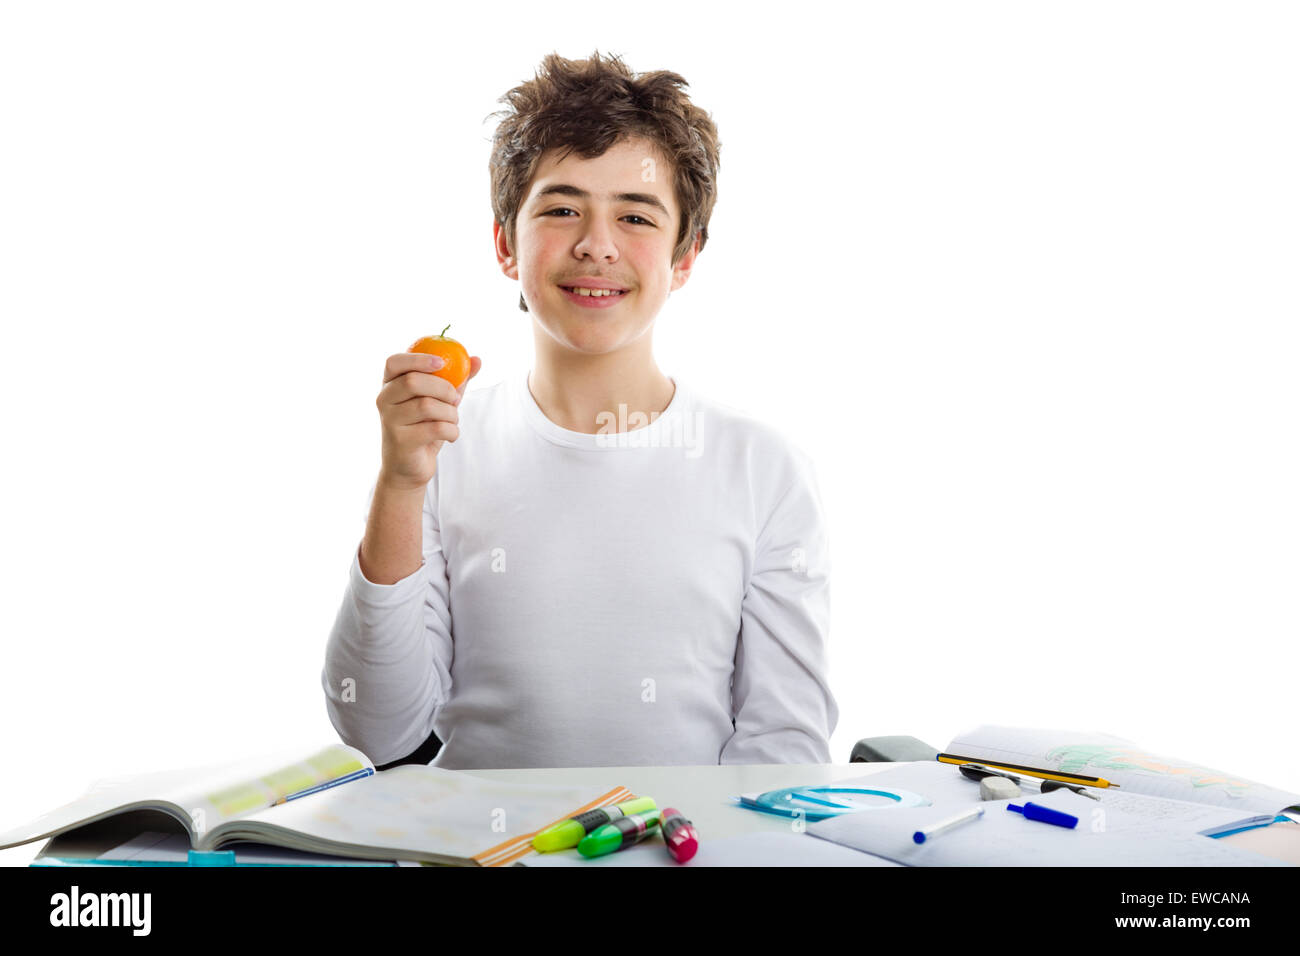 Caucasian teenager boy holding a tangerine with right hand while doing homework Stock Photo